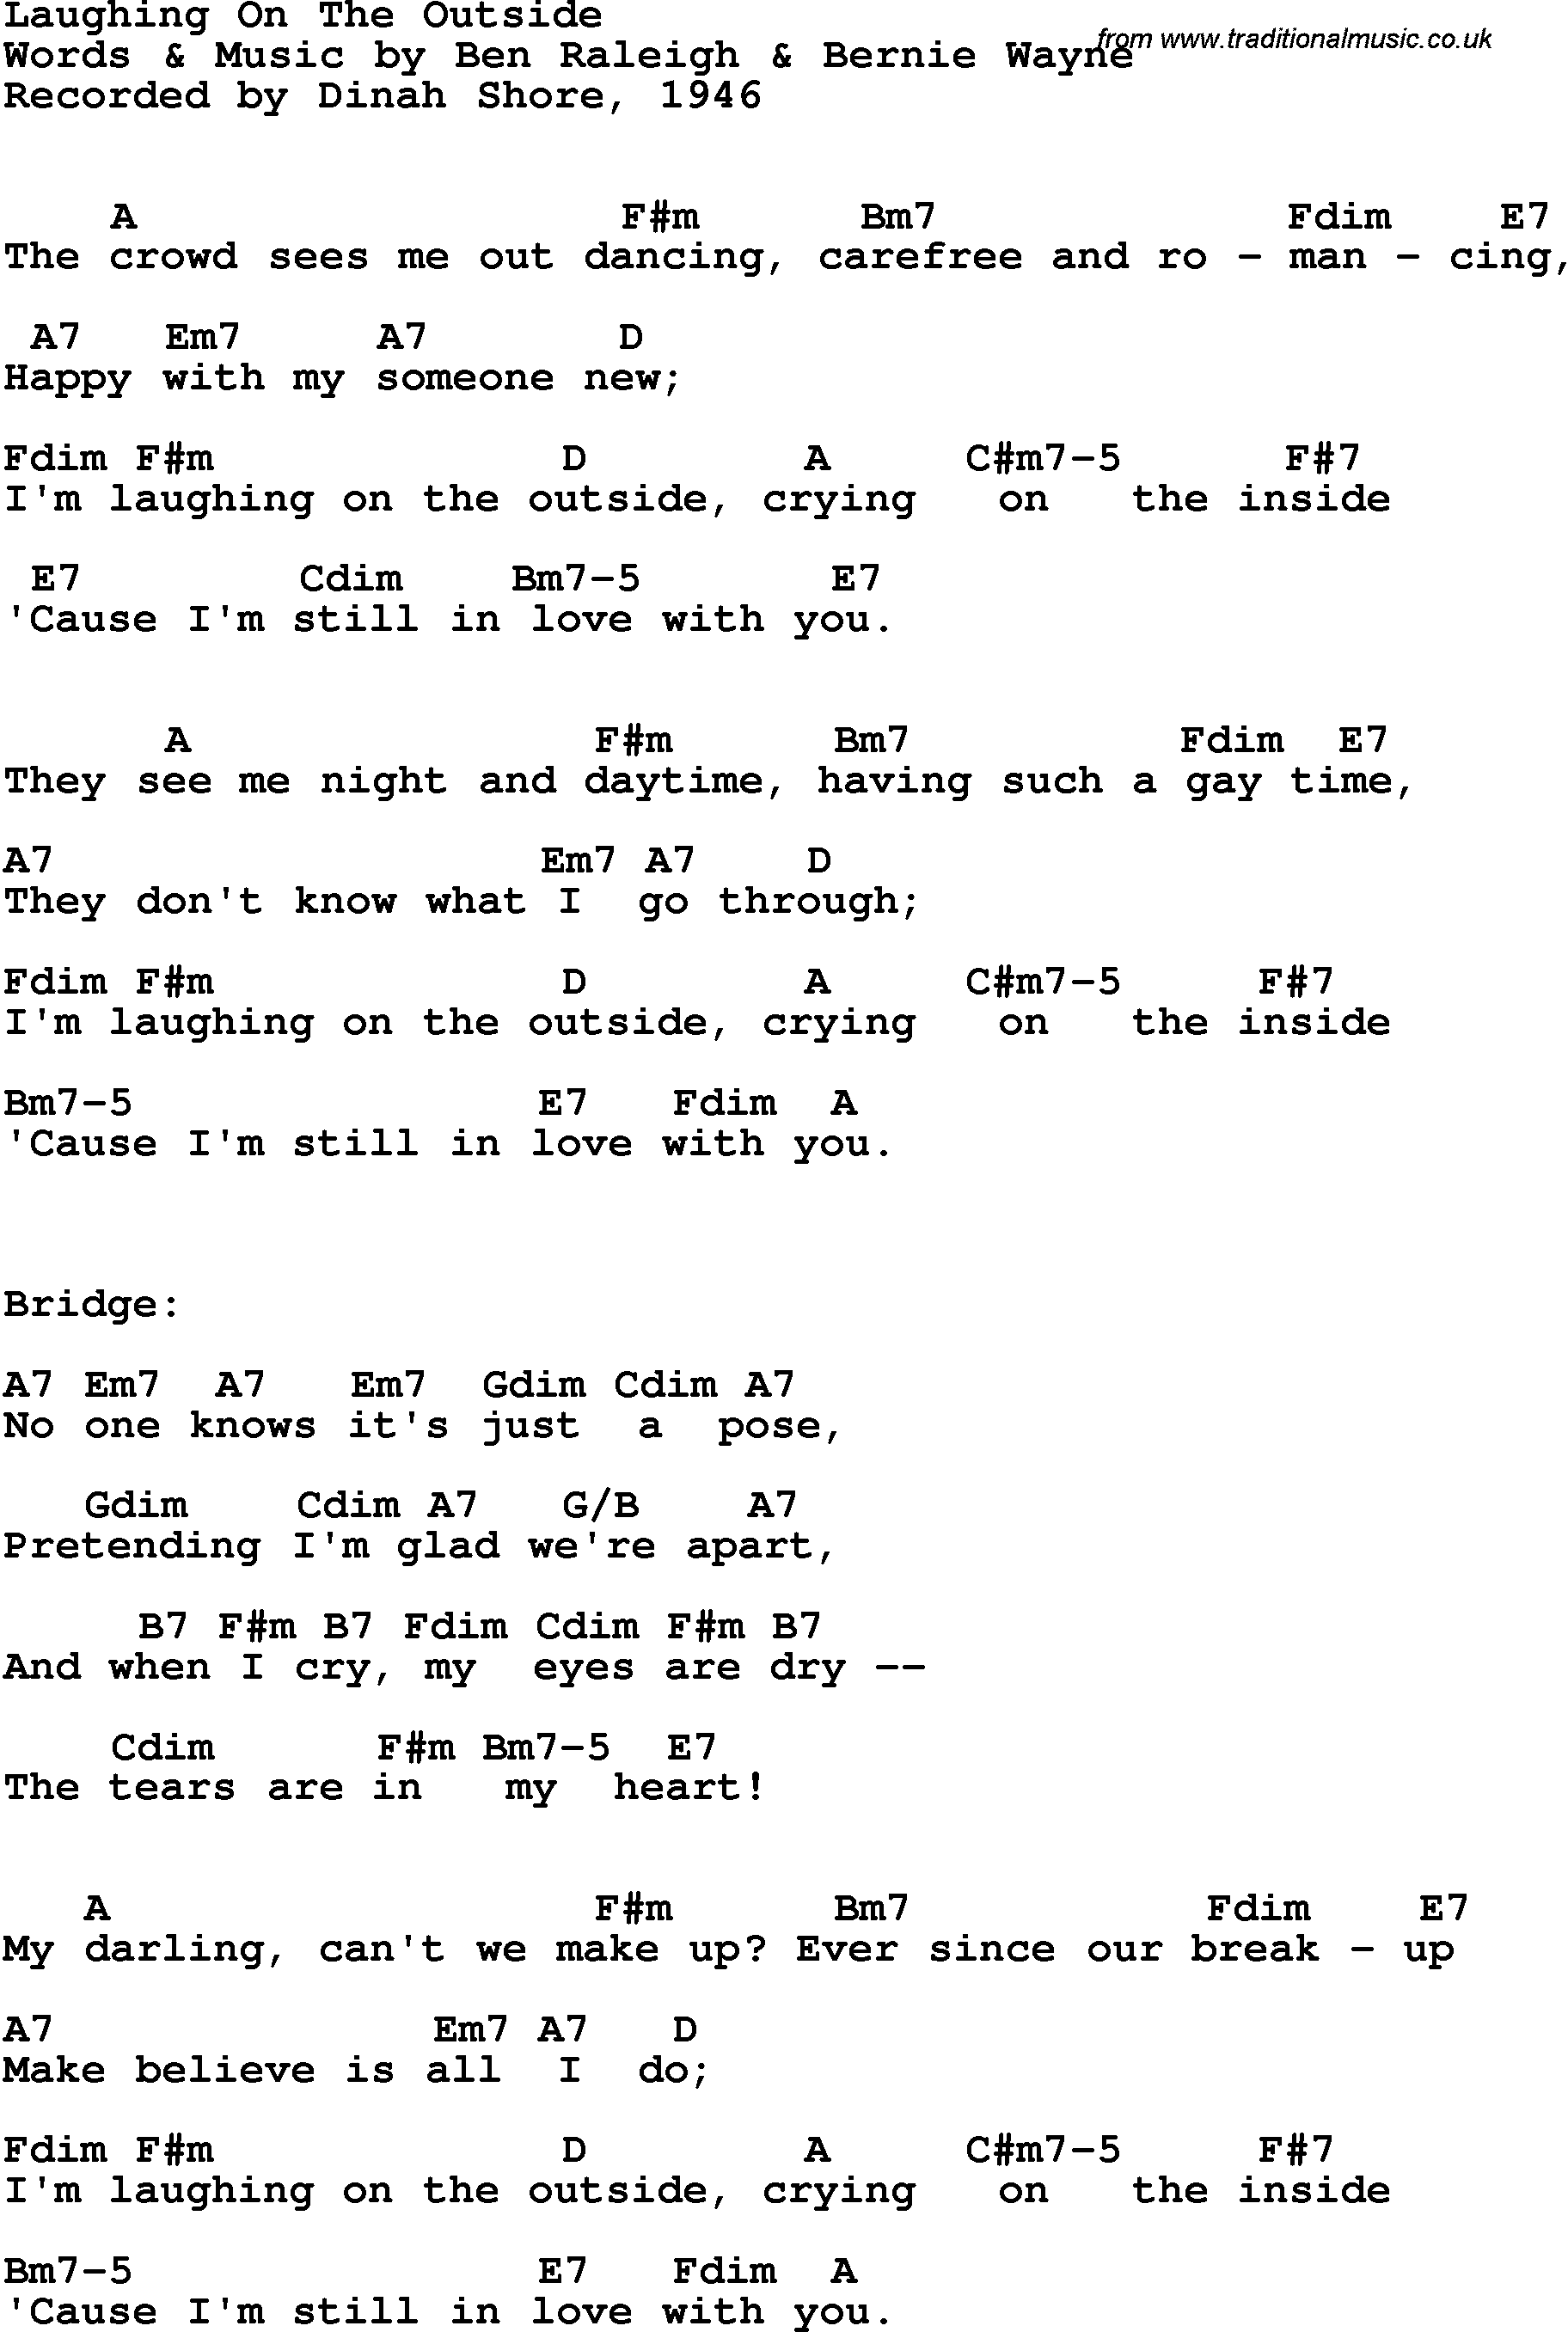 Song Lyrics with guitar chords for Laughing On The Outside - Dinah Shore, 1946